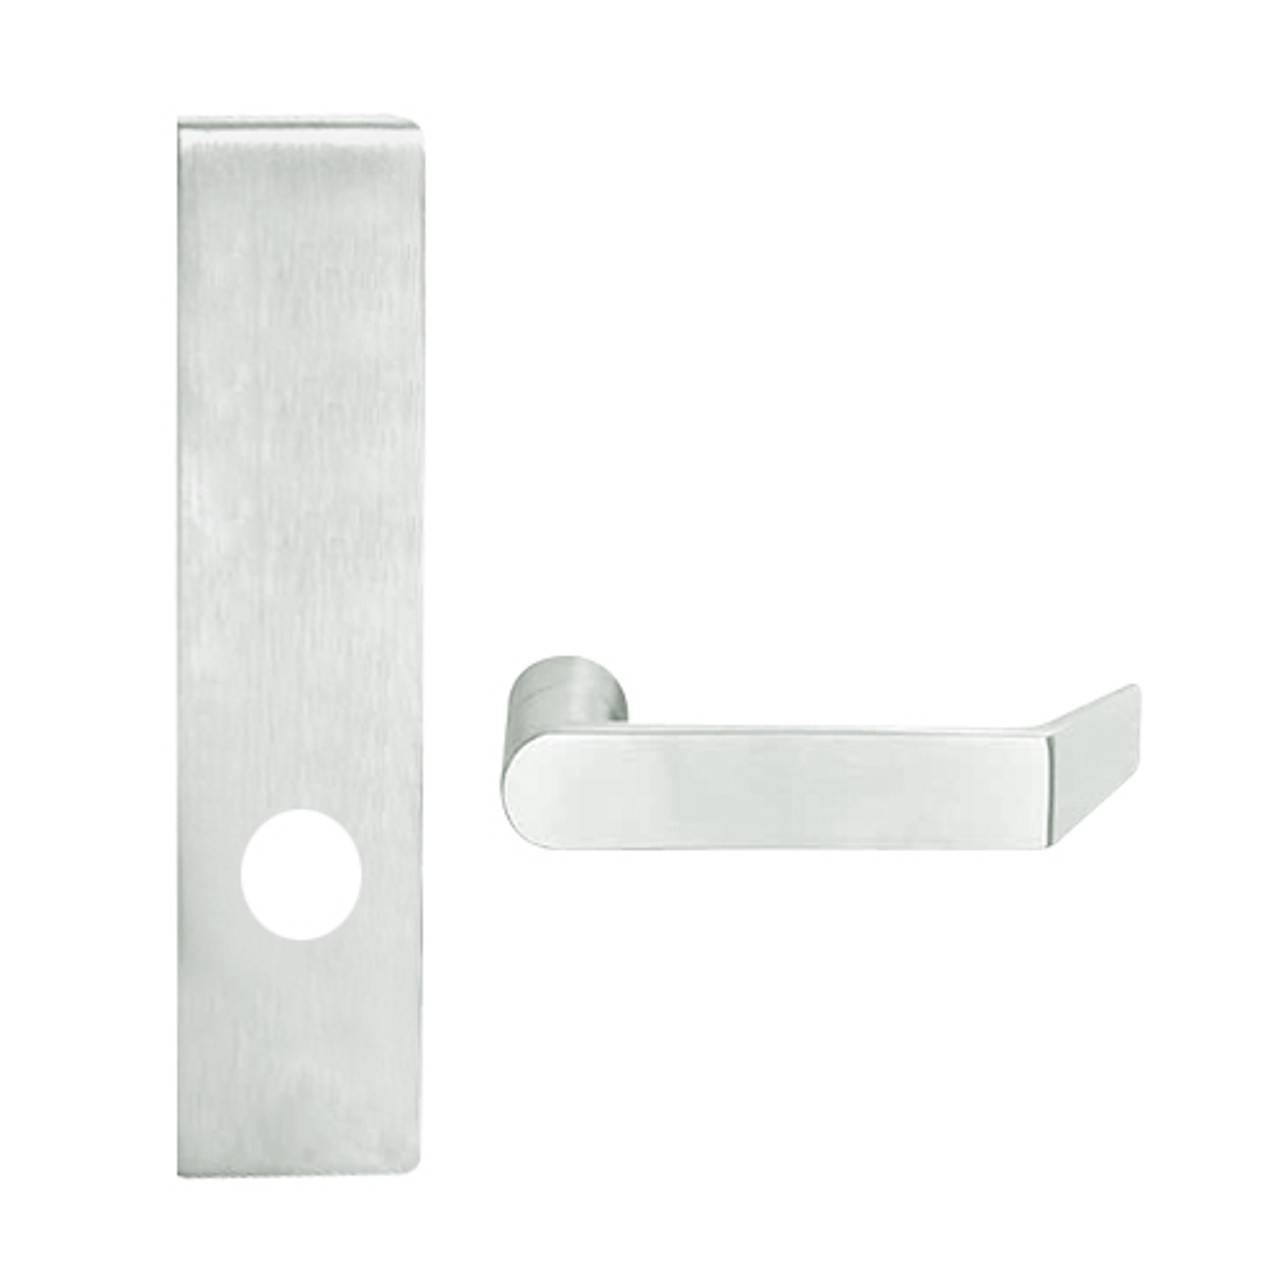 L9025-06L-619 Schlage L Series Exit Commercial Mortise Lock with 06 Cast Lever Design in Satin Nickel